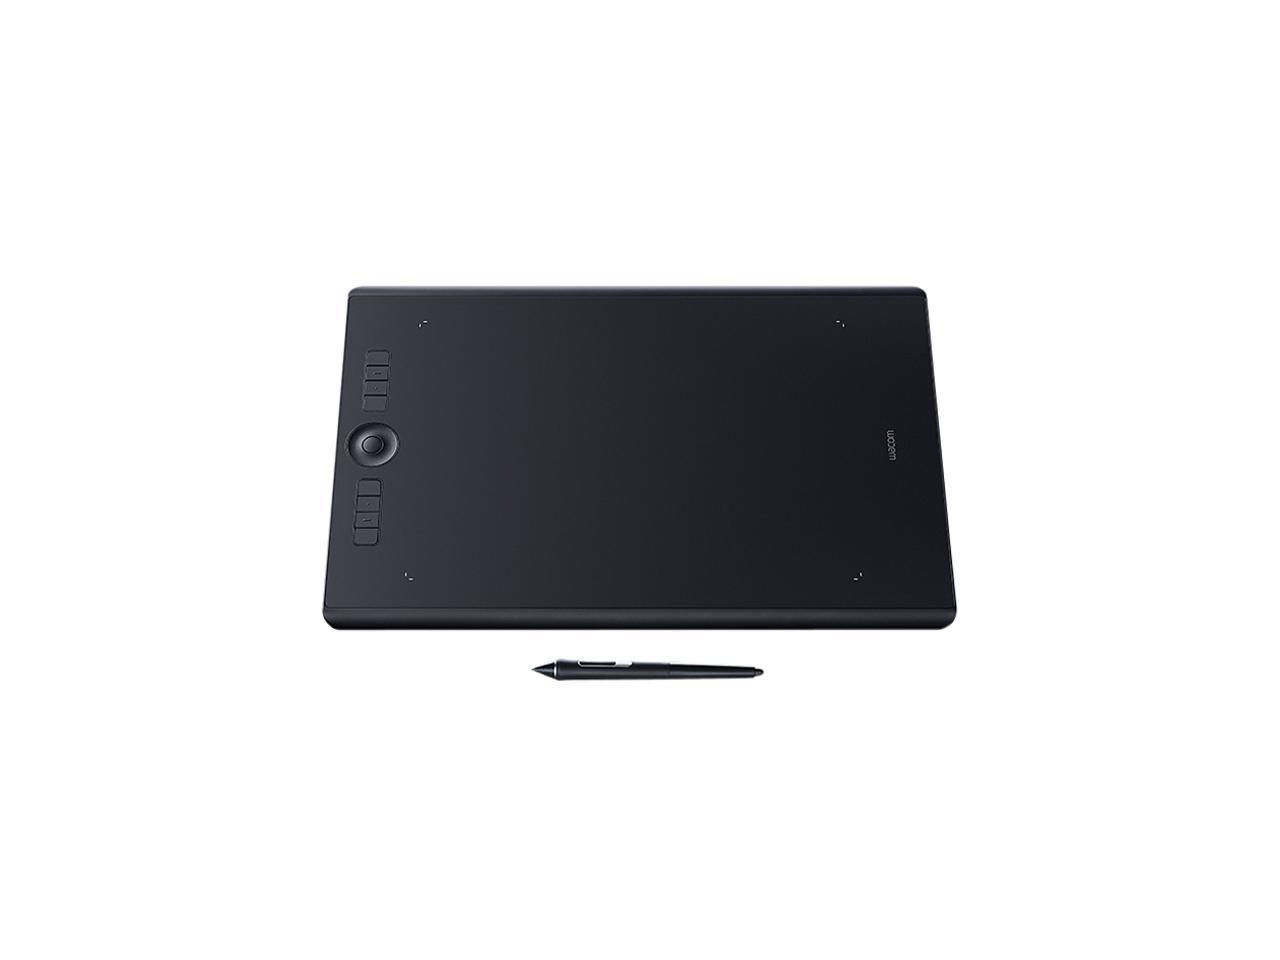 Wacom Intuos Pro Digital Graphic Drawing Tablet for Mac or PC, Large, (PTH860) - image 1 of 8